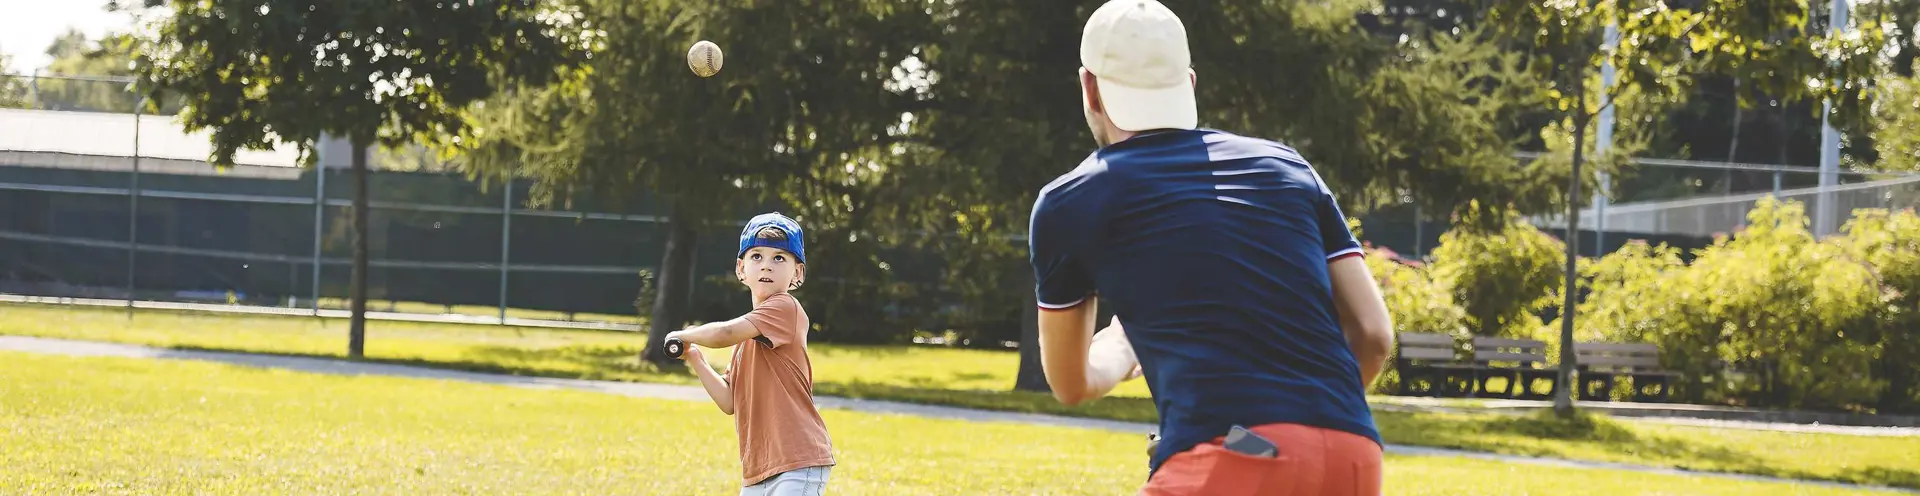 Personal Banking Growth - Father & Son Playing Baseball